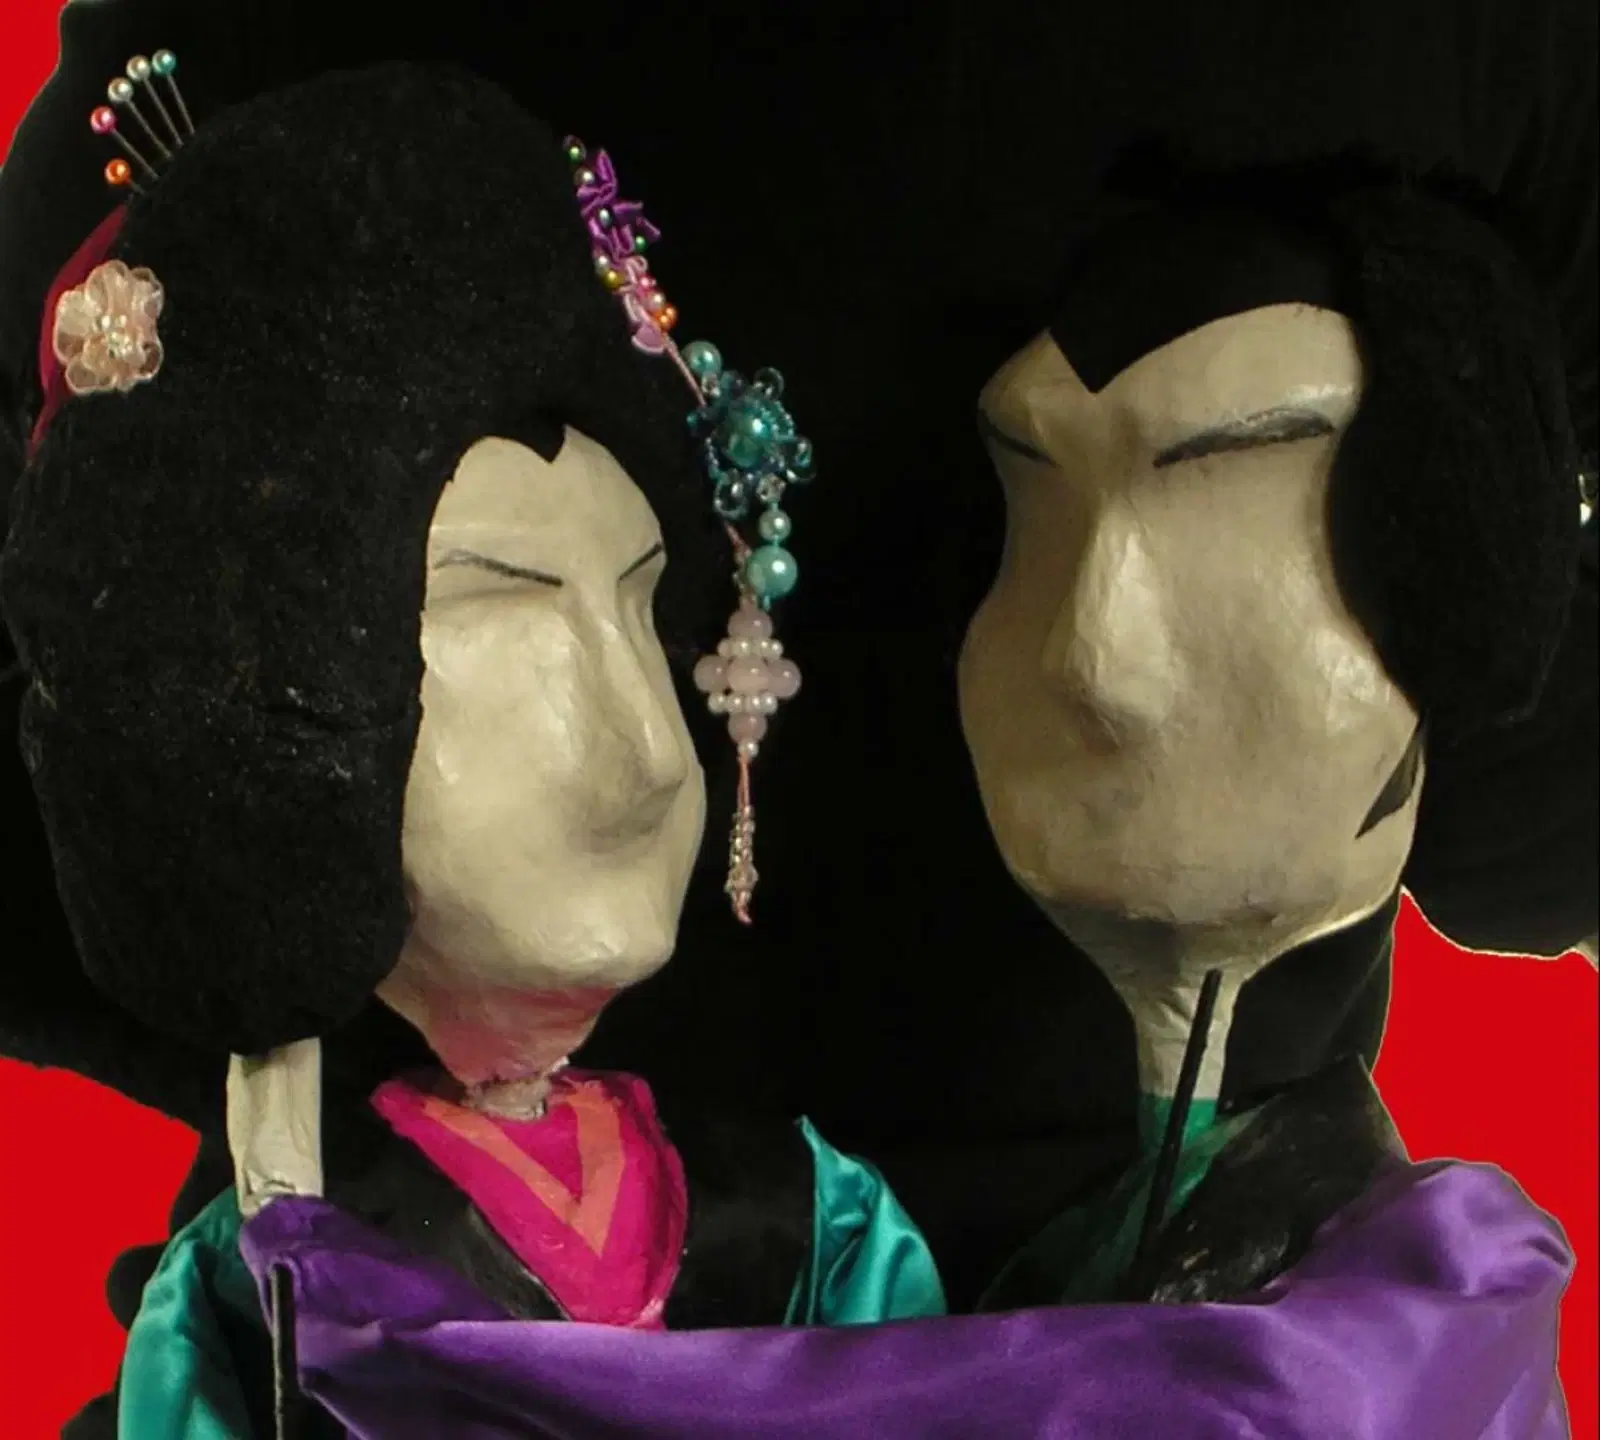 Two traditional asian-style puppets adorned with elaborate hairstyles and colorful costumes facing each other against a dark background.